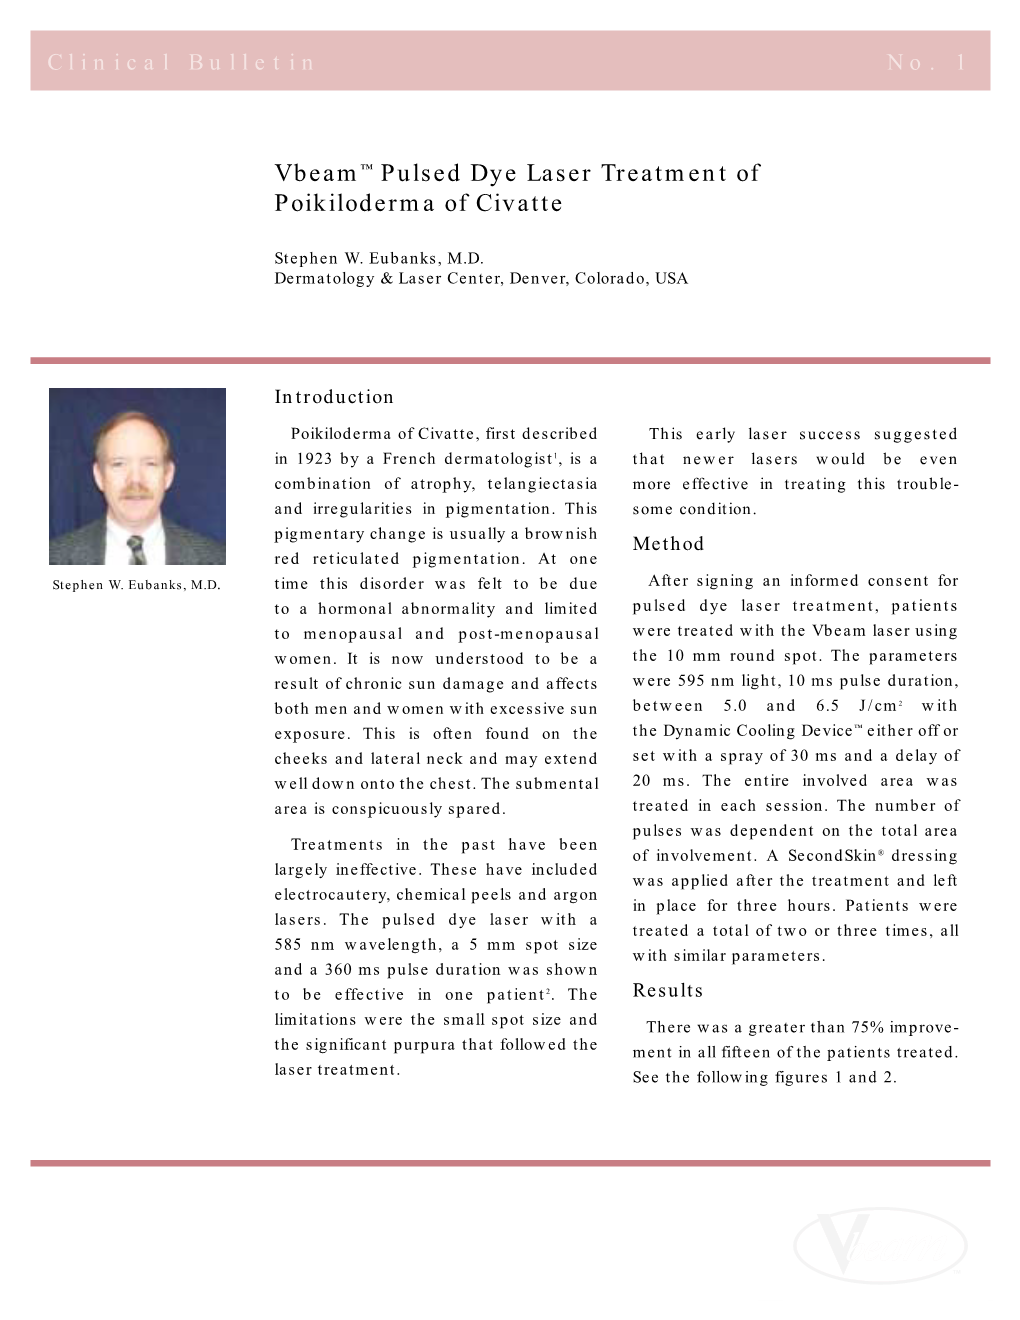 Vbeam™ Pulsed Dye Laser Treatment of Poikiloderma of Civatte